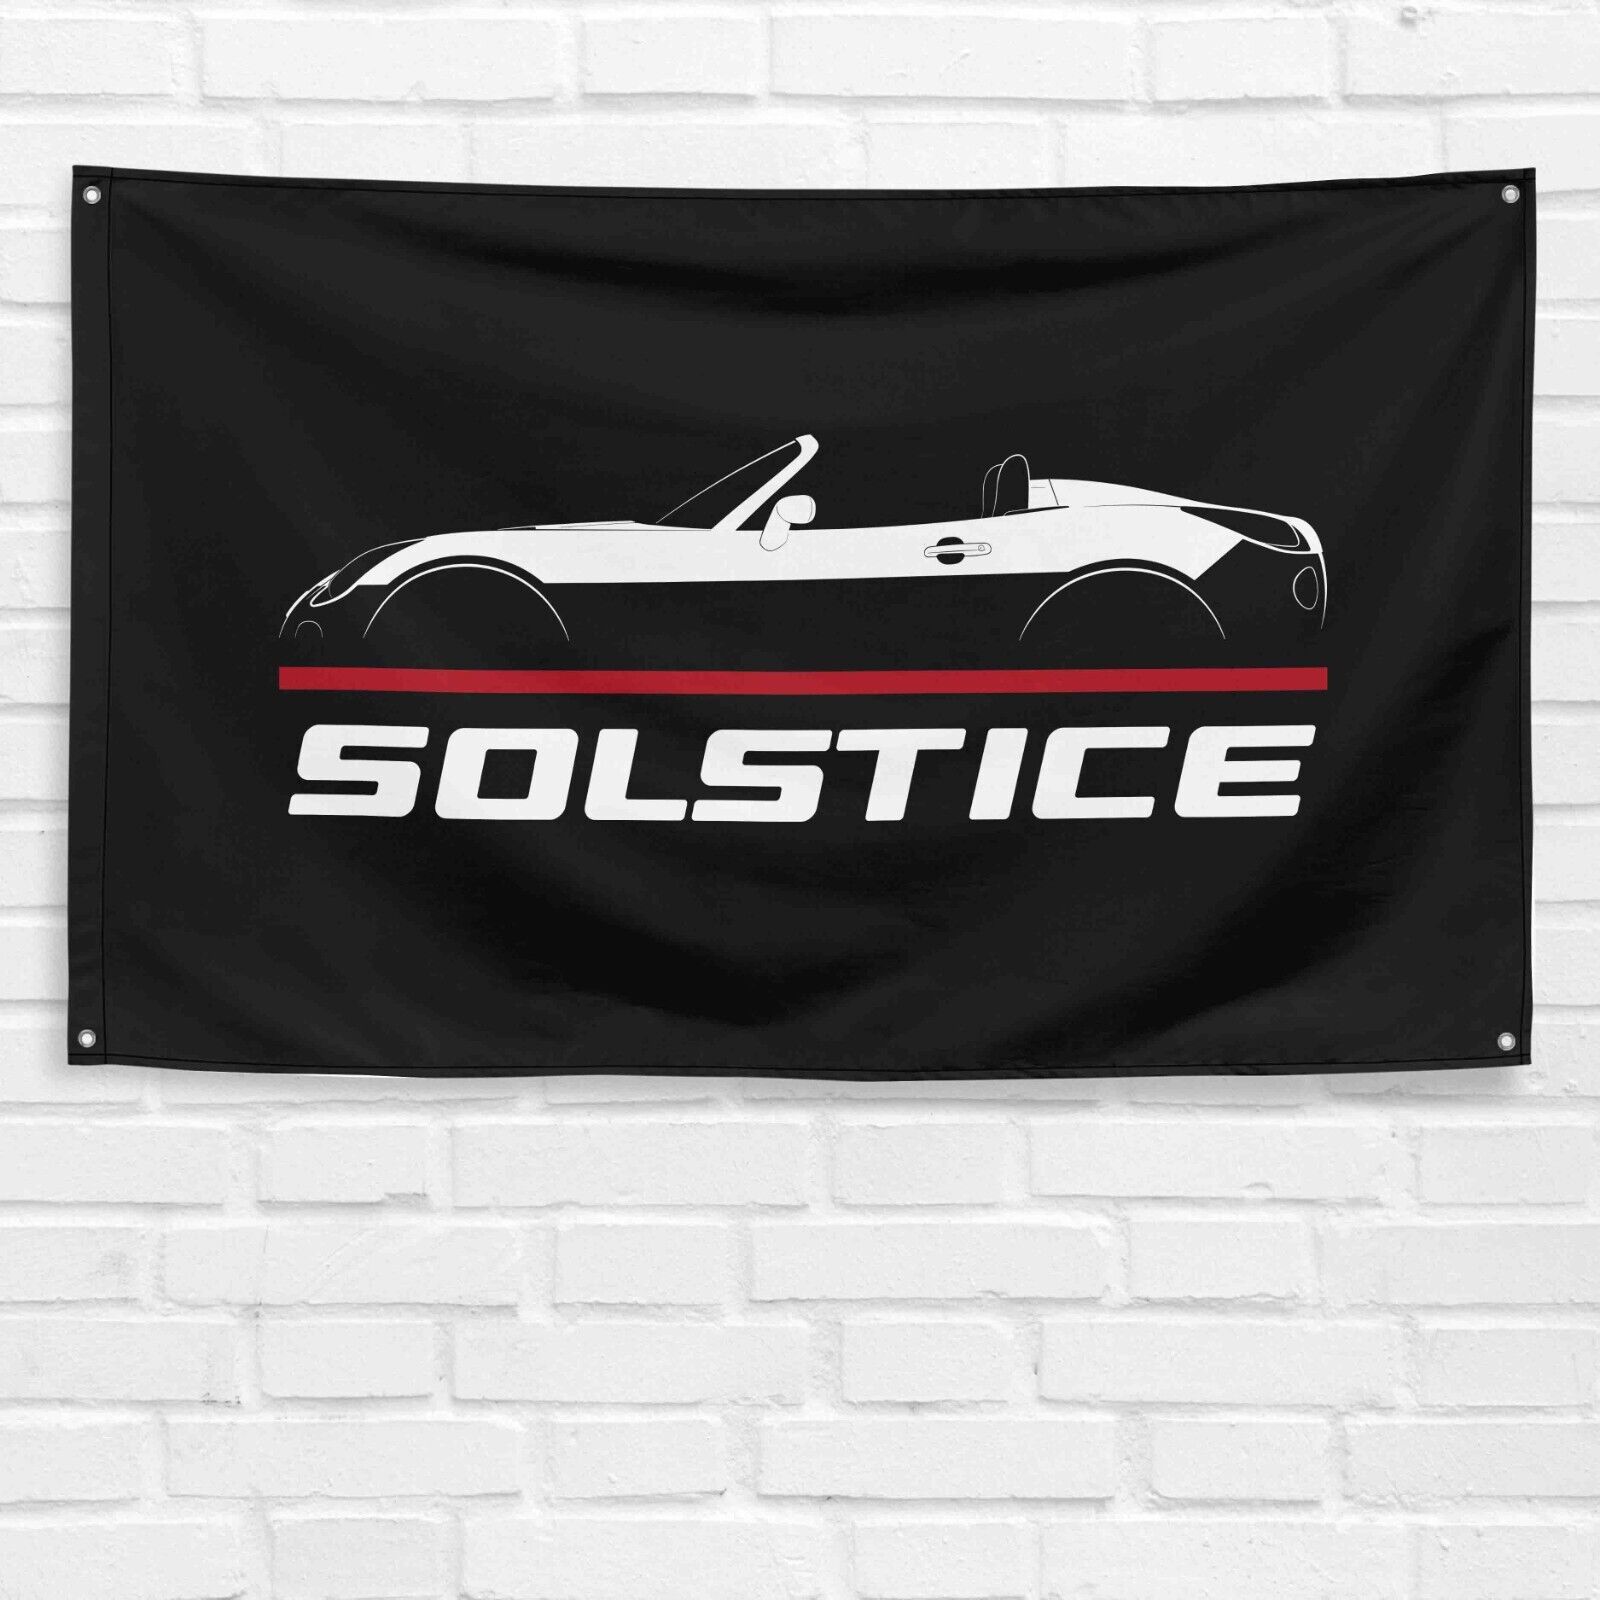 For Pontiac Solstice 2002-2009 Enthusiast 3x5 ft Flag Banner Birthday Gift